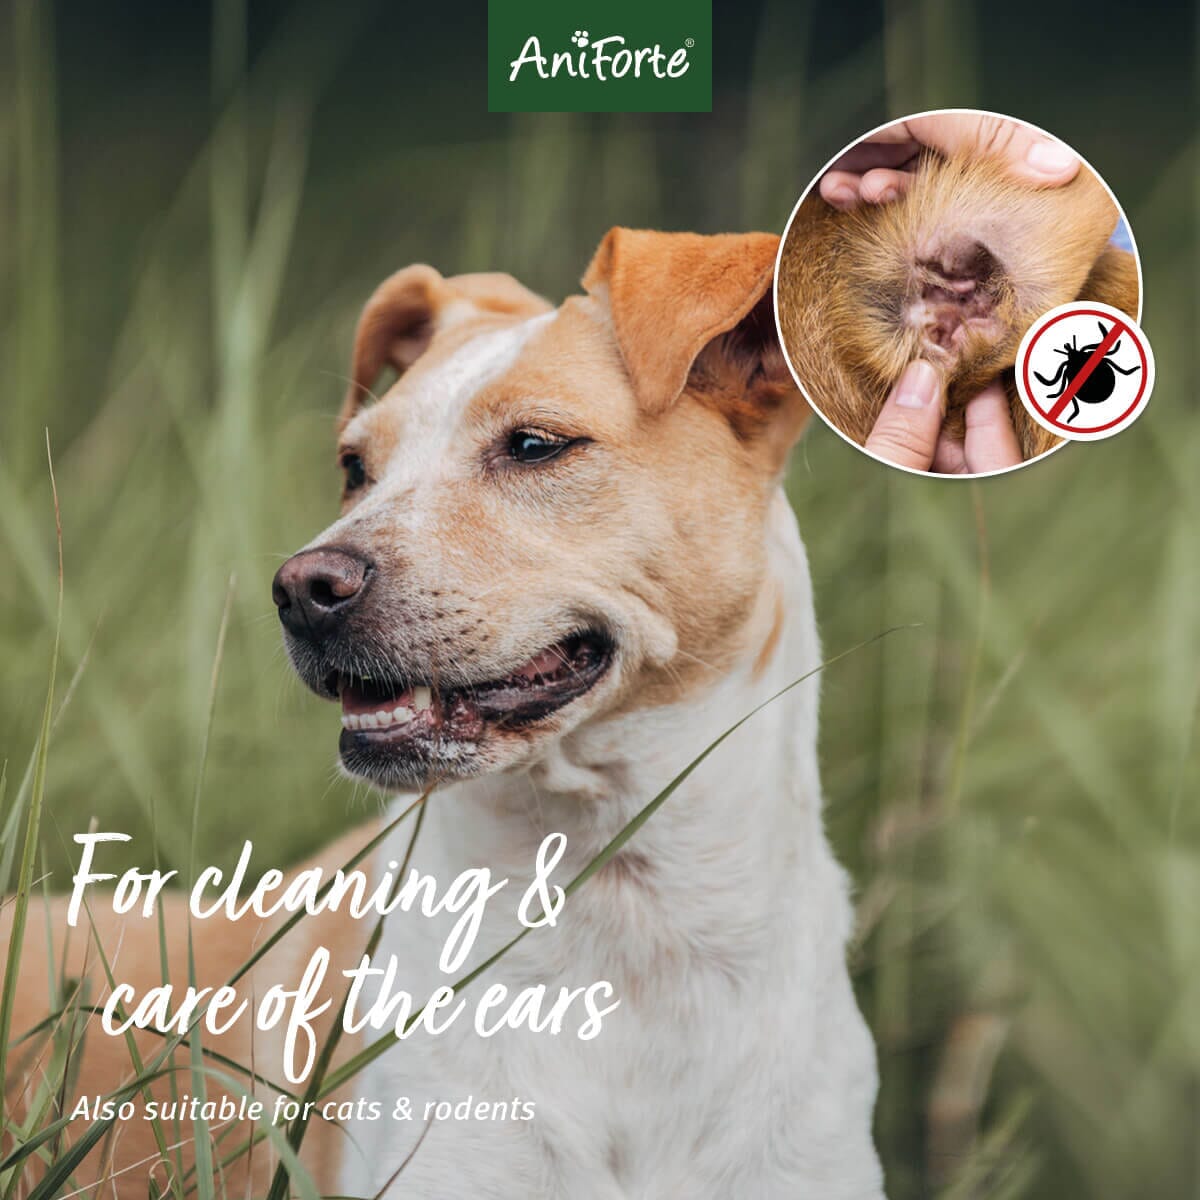 Ear Mite Treatment Oil Drops - available in 2 sizes - AniForte UK